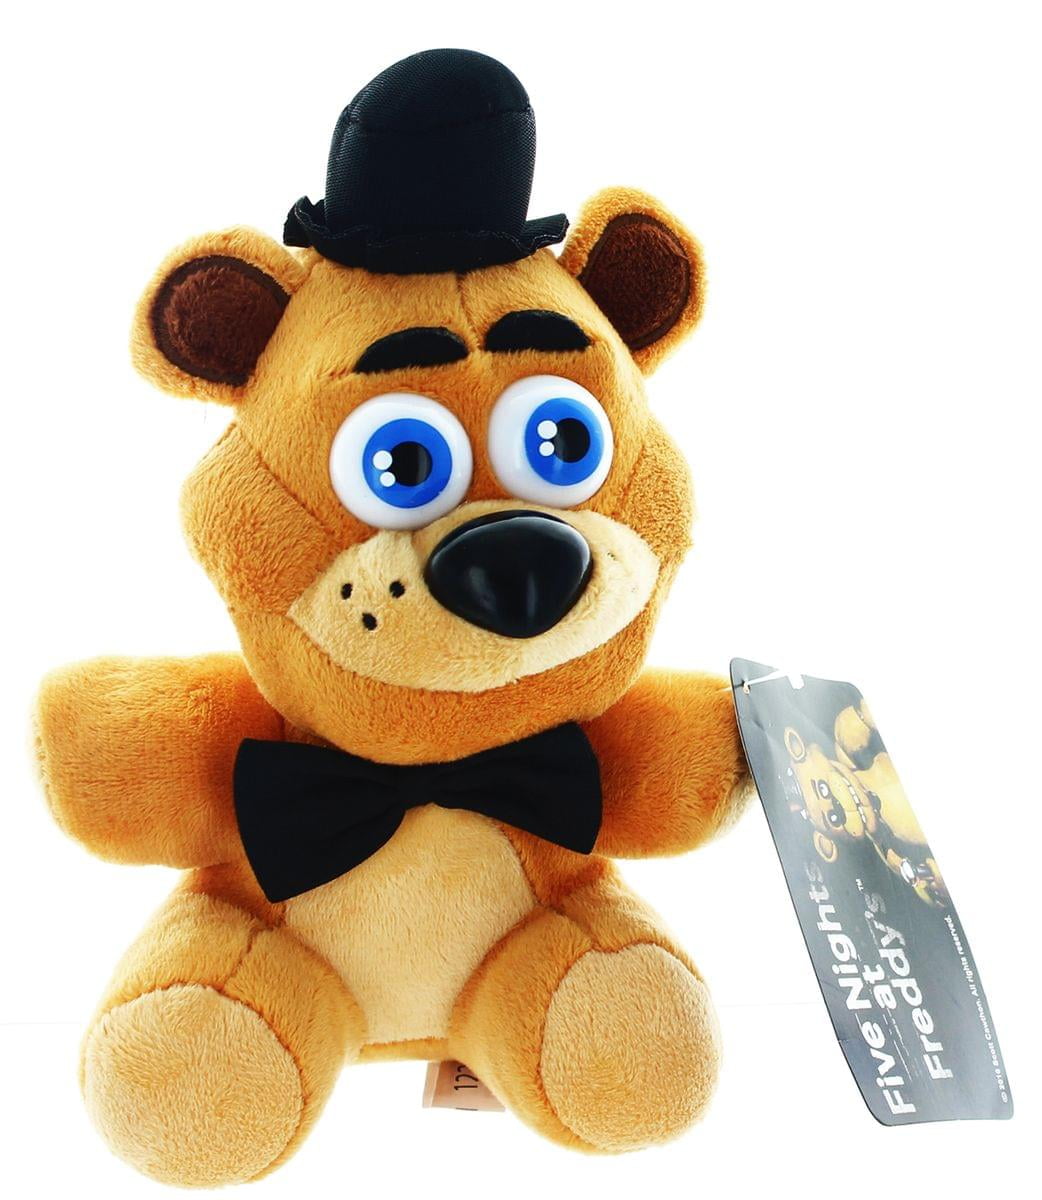 Every Officially Licensed FNAF Plushie Updated (Funko, Sanshee